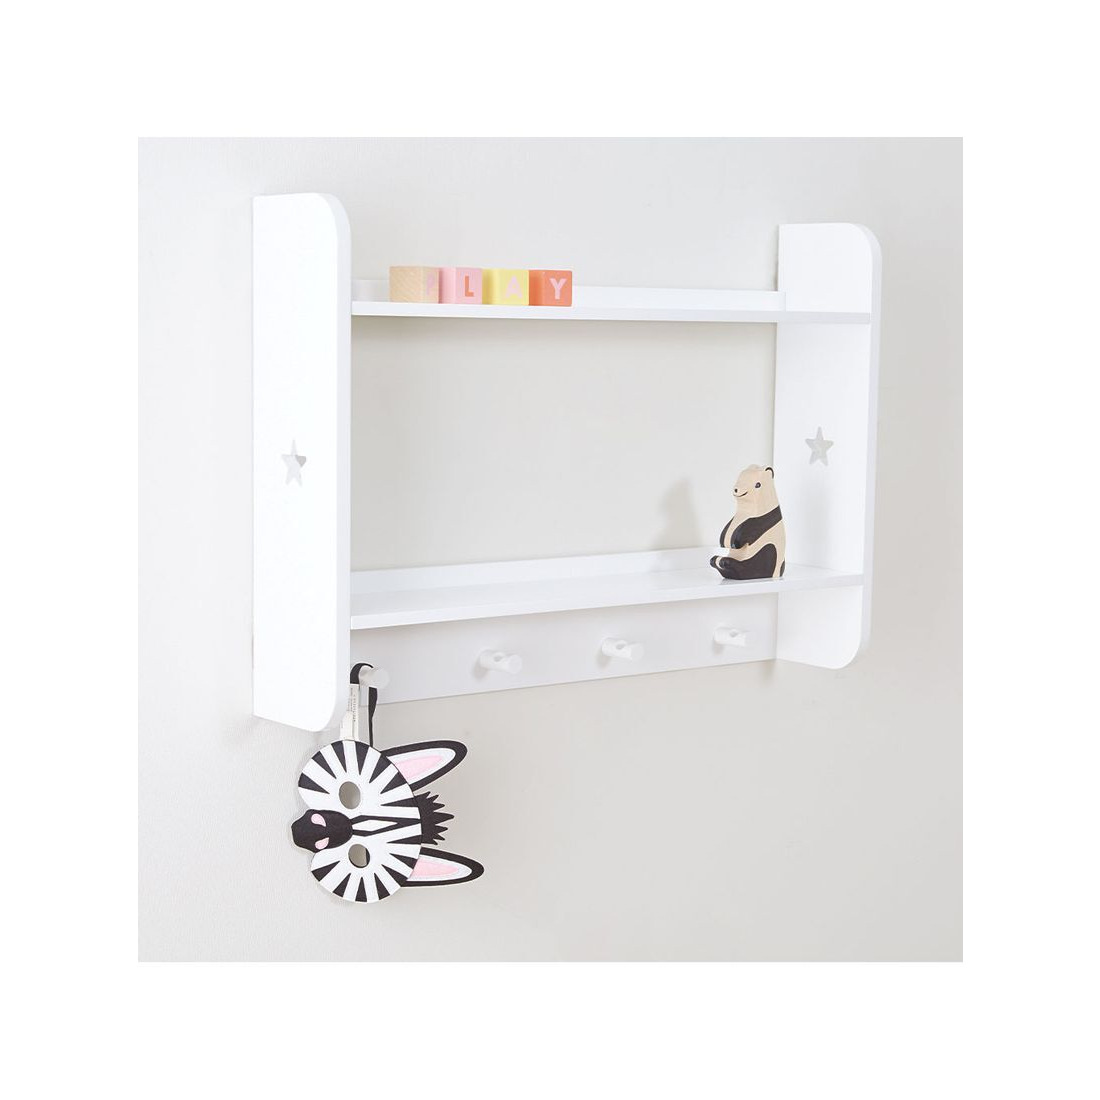 Great Little Trading Co Star Bright Landscape Wall Shelves and Hooks, White - image 1